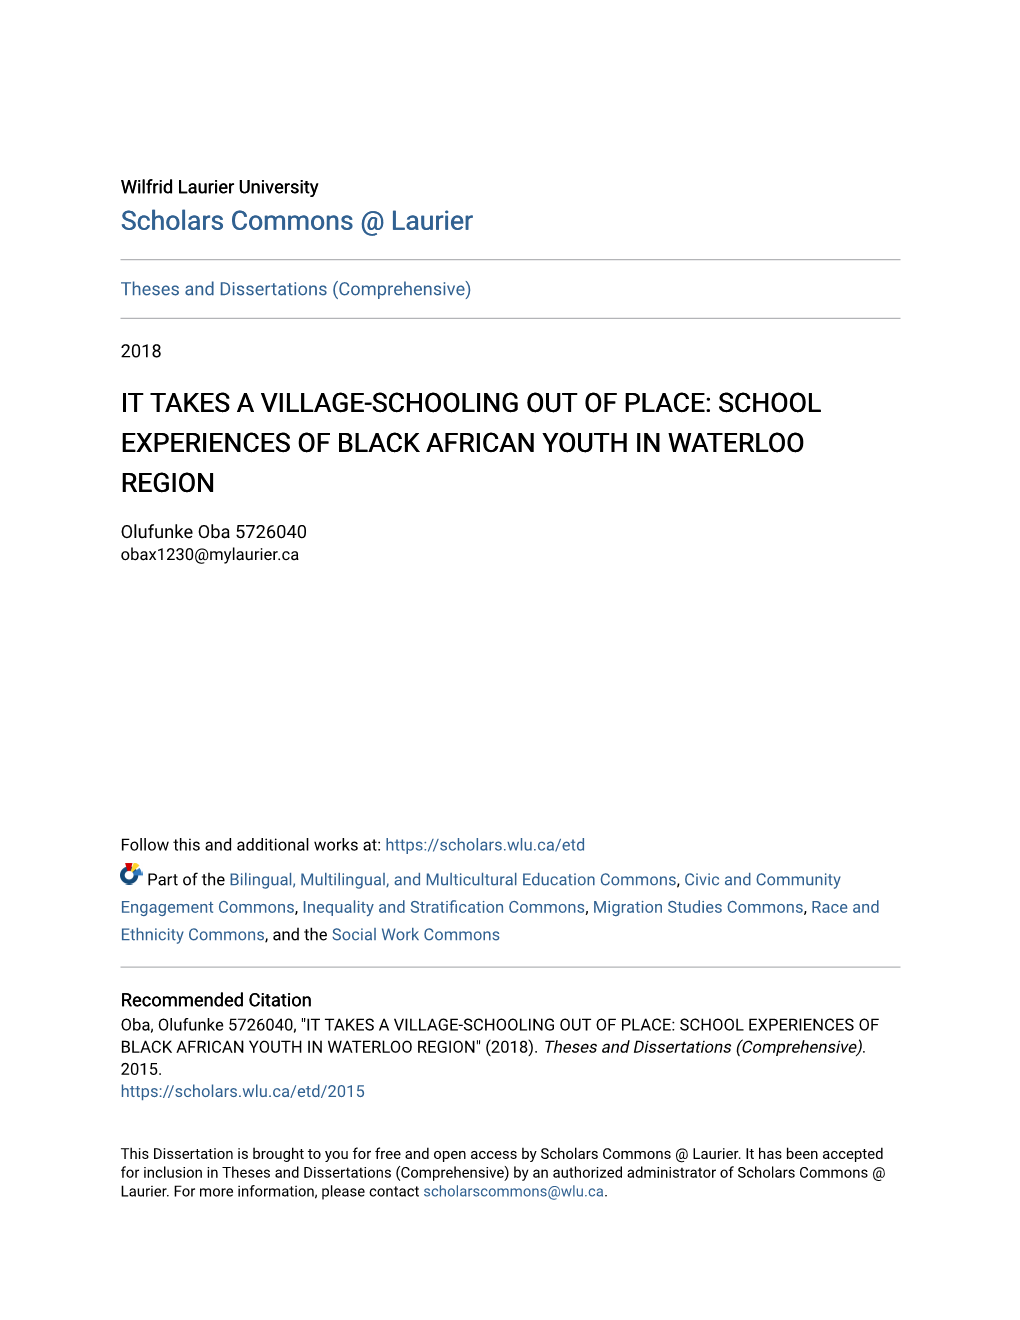 It Takes a Village-Schooling out of Place: School Experiences of Black African Youth in Waterloo Region